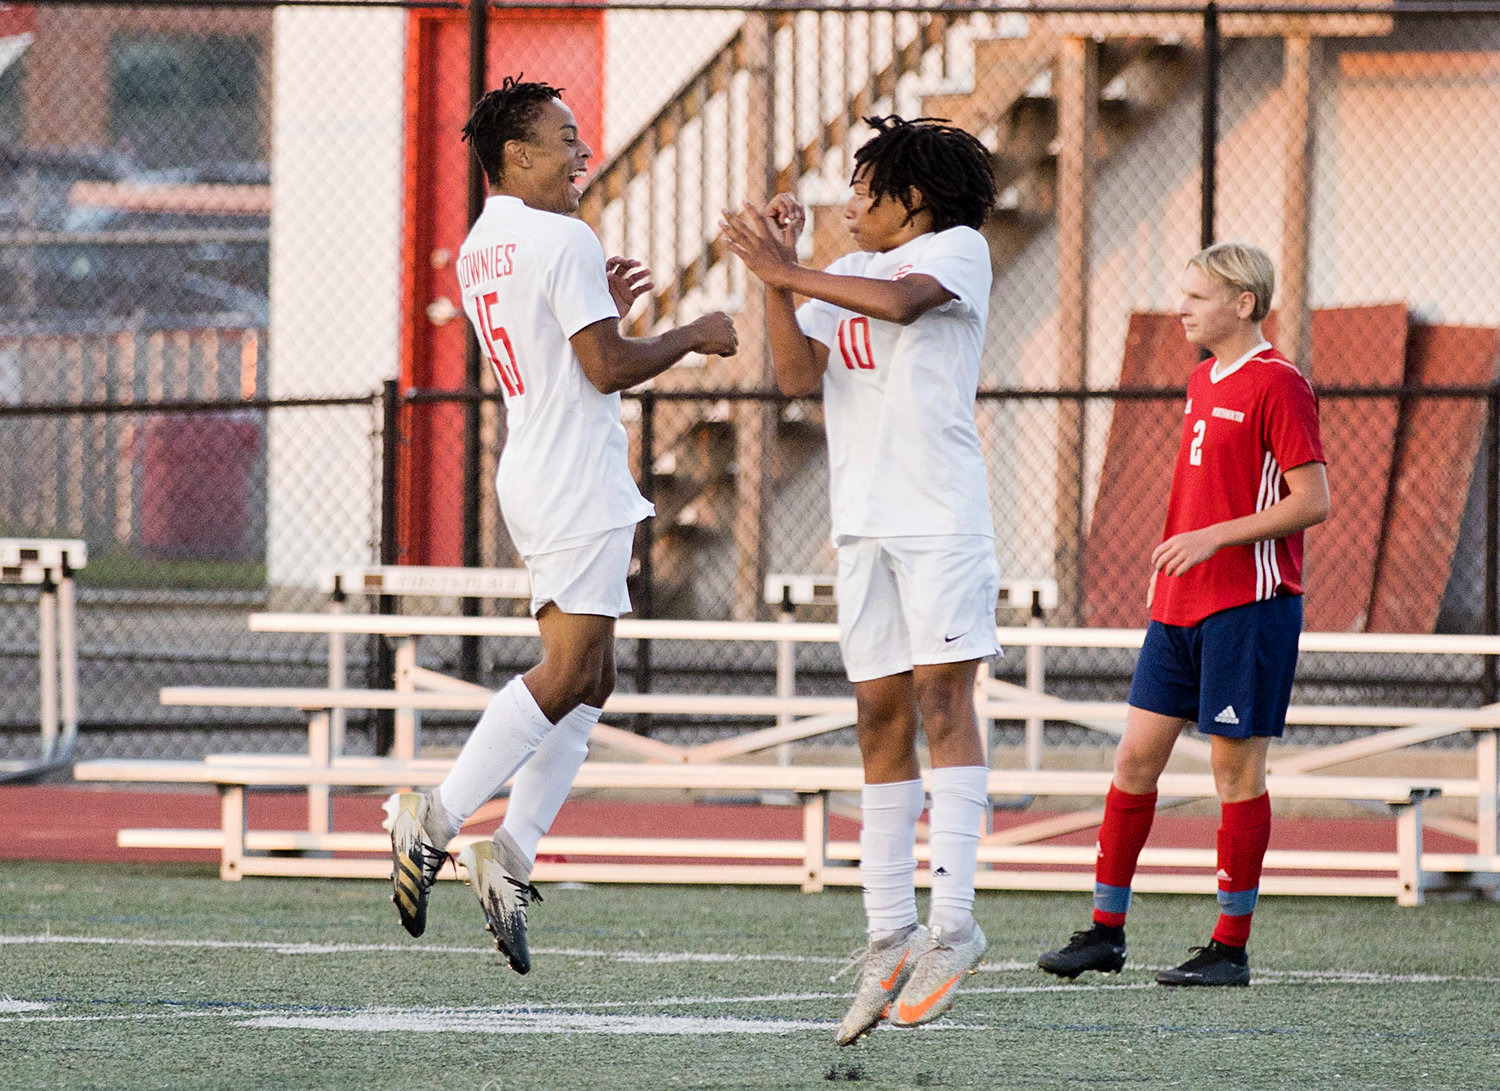 Martim Moniz (left) and Ricardo Lima celebrate a game tying goal during the first half of Saturday's game, against Portsmouth.